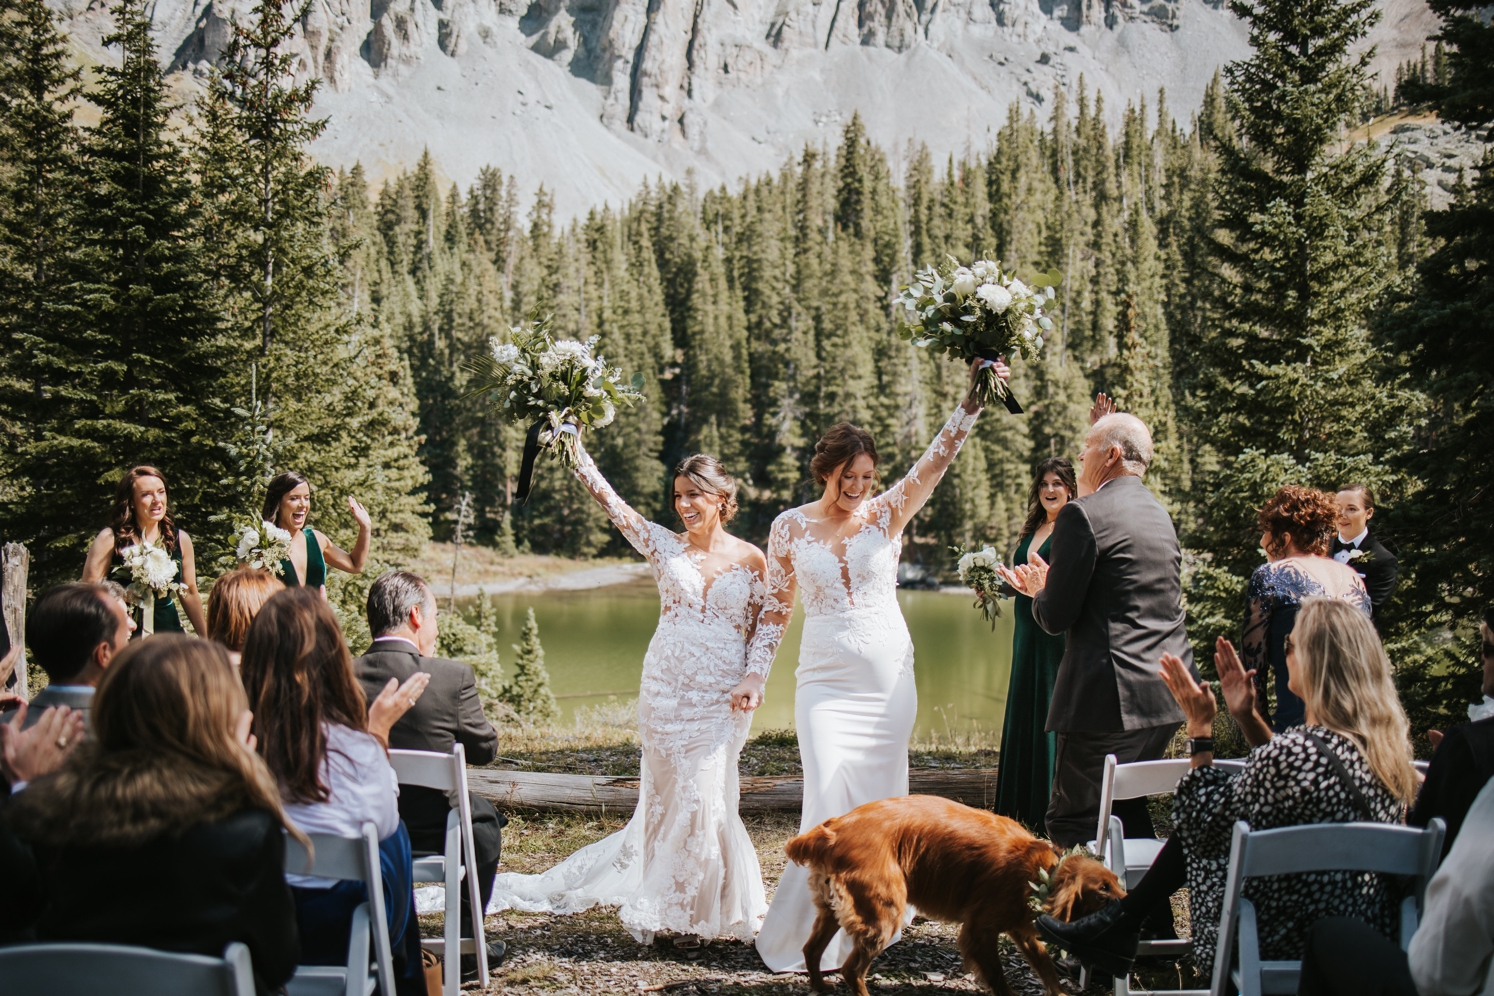 Couple walking down aisle after ceremony with dog in front of them | McArthur Weddings and Events